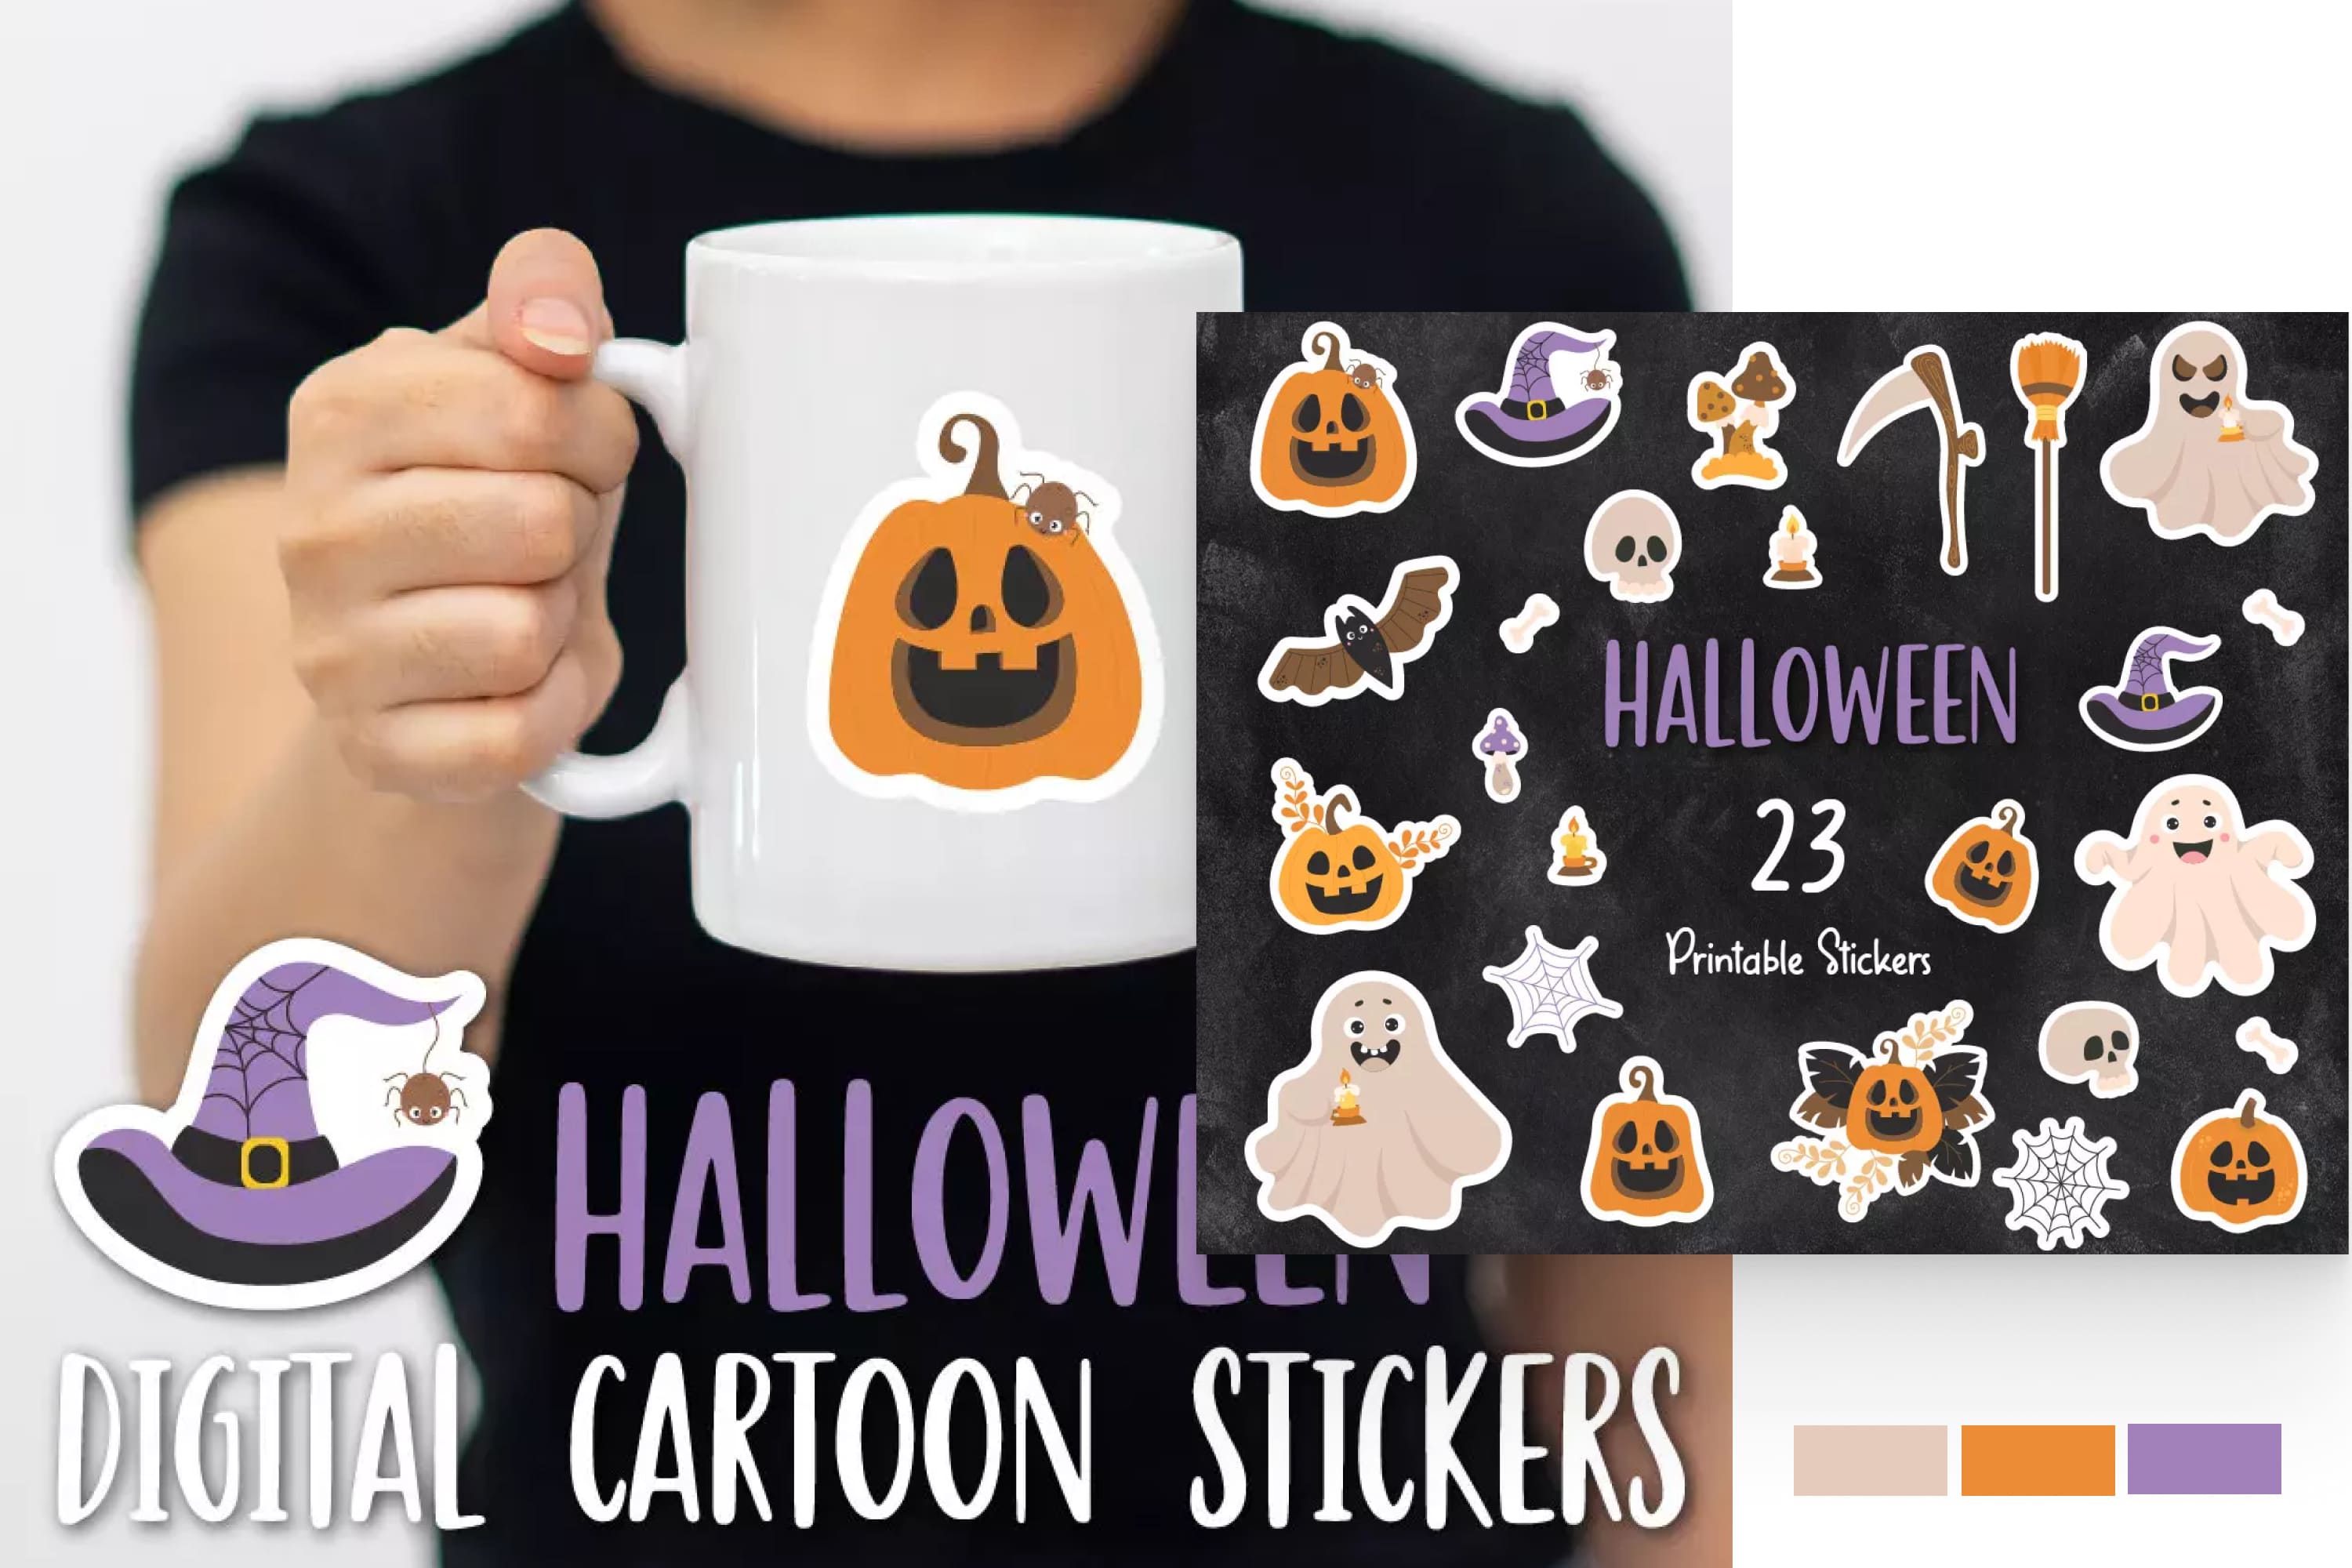 Collage of colorful stickers with cute pumpkins, ghosts, skulls, cobwebs.